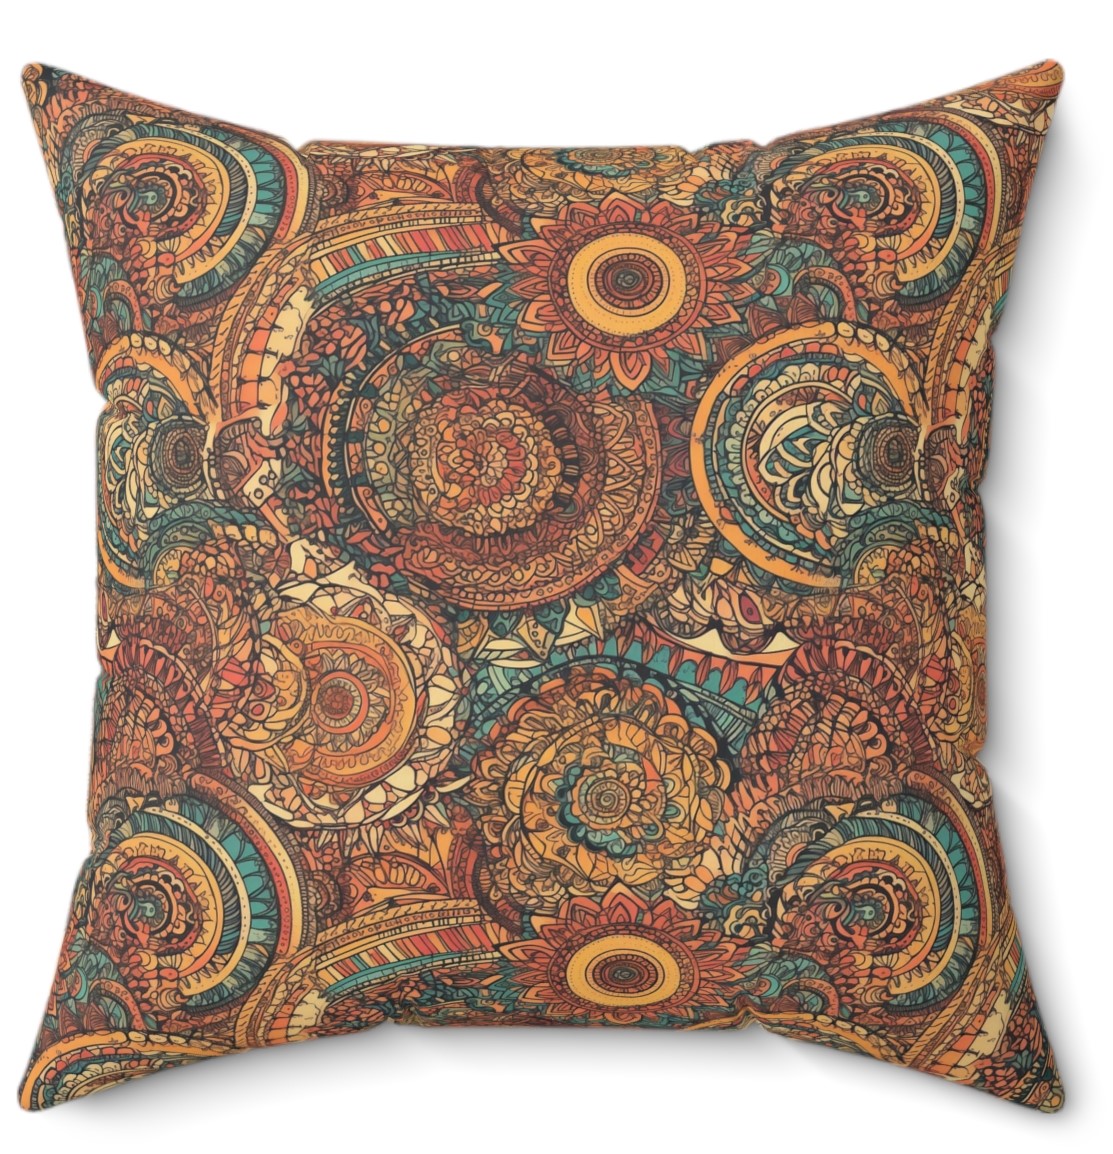 Close-up of the Artistic Flair Colorful Doodles Print Pillow, showcasing the intricate and lively colorful doodles that exude artistic expression